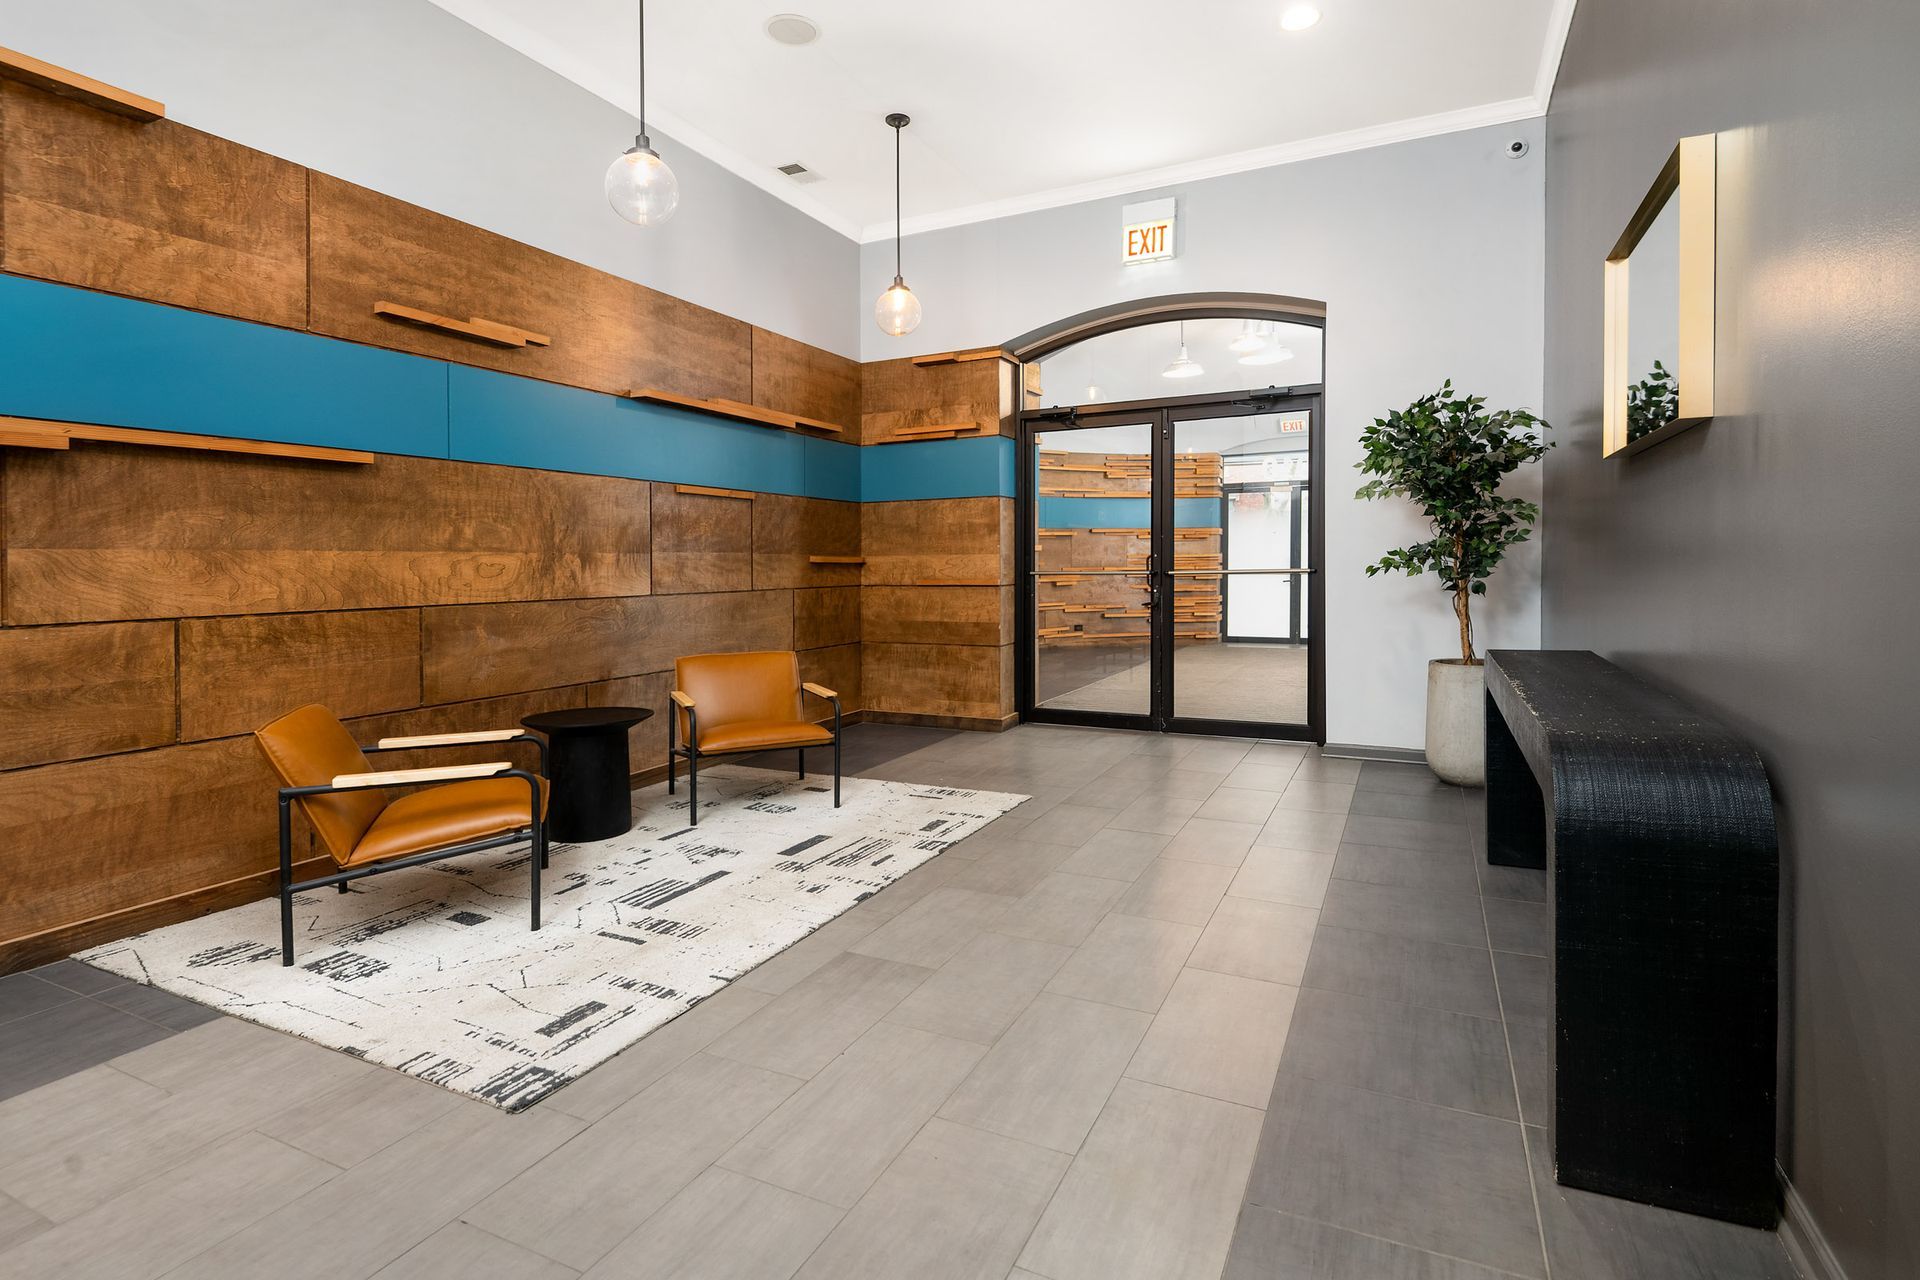 A lobby with wooden walls, chairs, a table, and a plant at 2010 West Pierce Avenue.